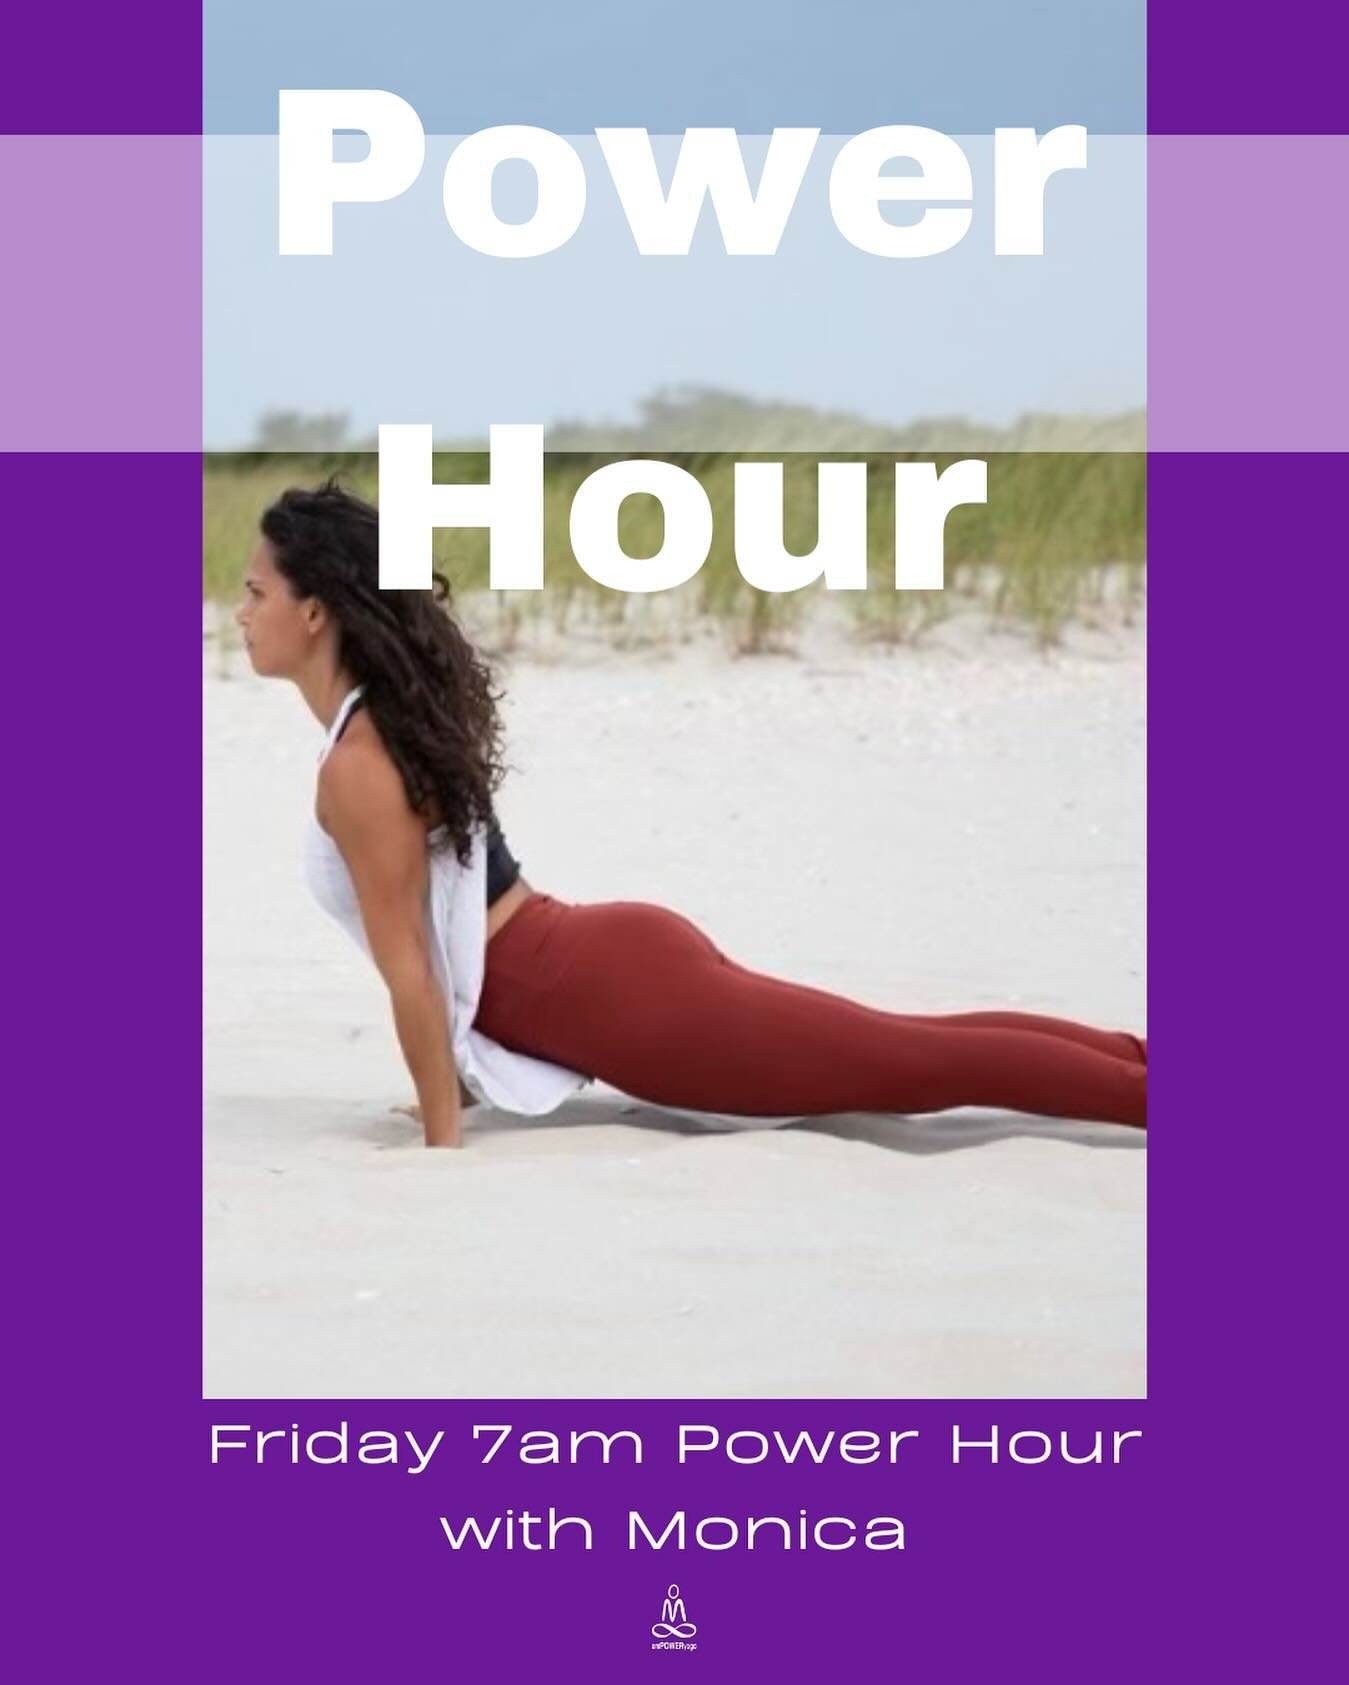 Catch @mone_ange_fran this Friday 7am Power Hour! 

Thursday Schedule

9:30-10:30am
Power Hour (Heated) 
with Anne

5:30-6:30pm
Power Hour (Heated) 
with Anne B

7:00-8:00pm
$5 Community Yoga (Warm)
with Shanya

Anytime
On Demand Class of the day

#e